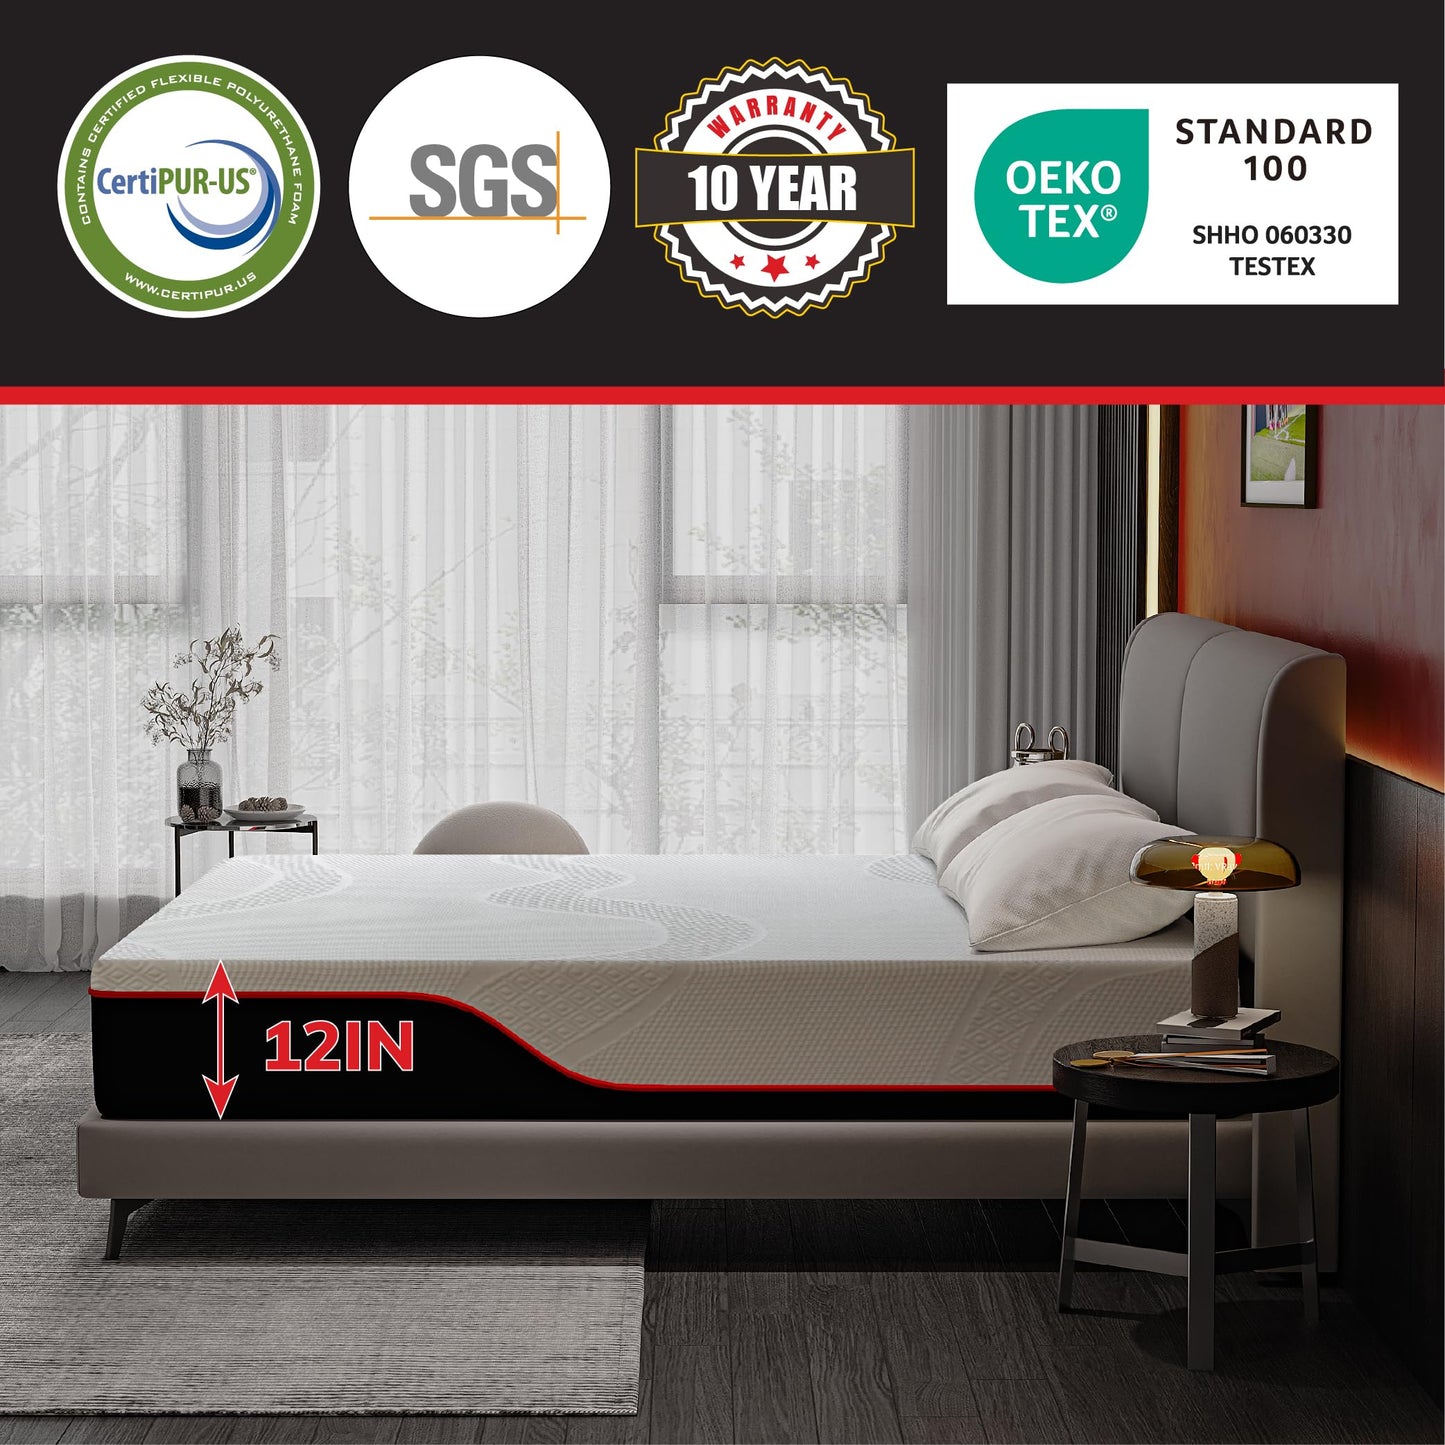 MLILY Cal King Mattress, Manchester United 12 Inch Memory Foam Mattress, Cool Sleep & Pressure Relief, Made in USA, White